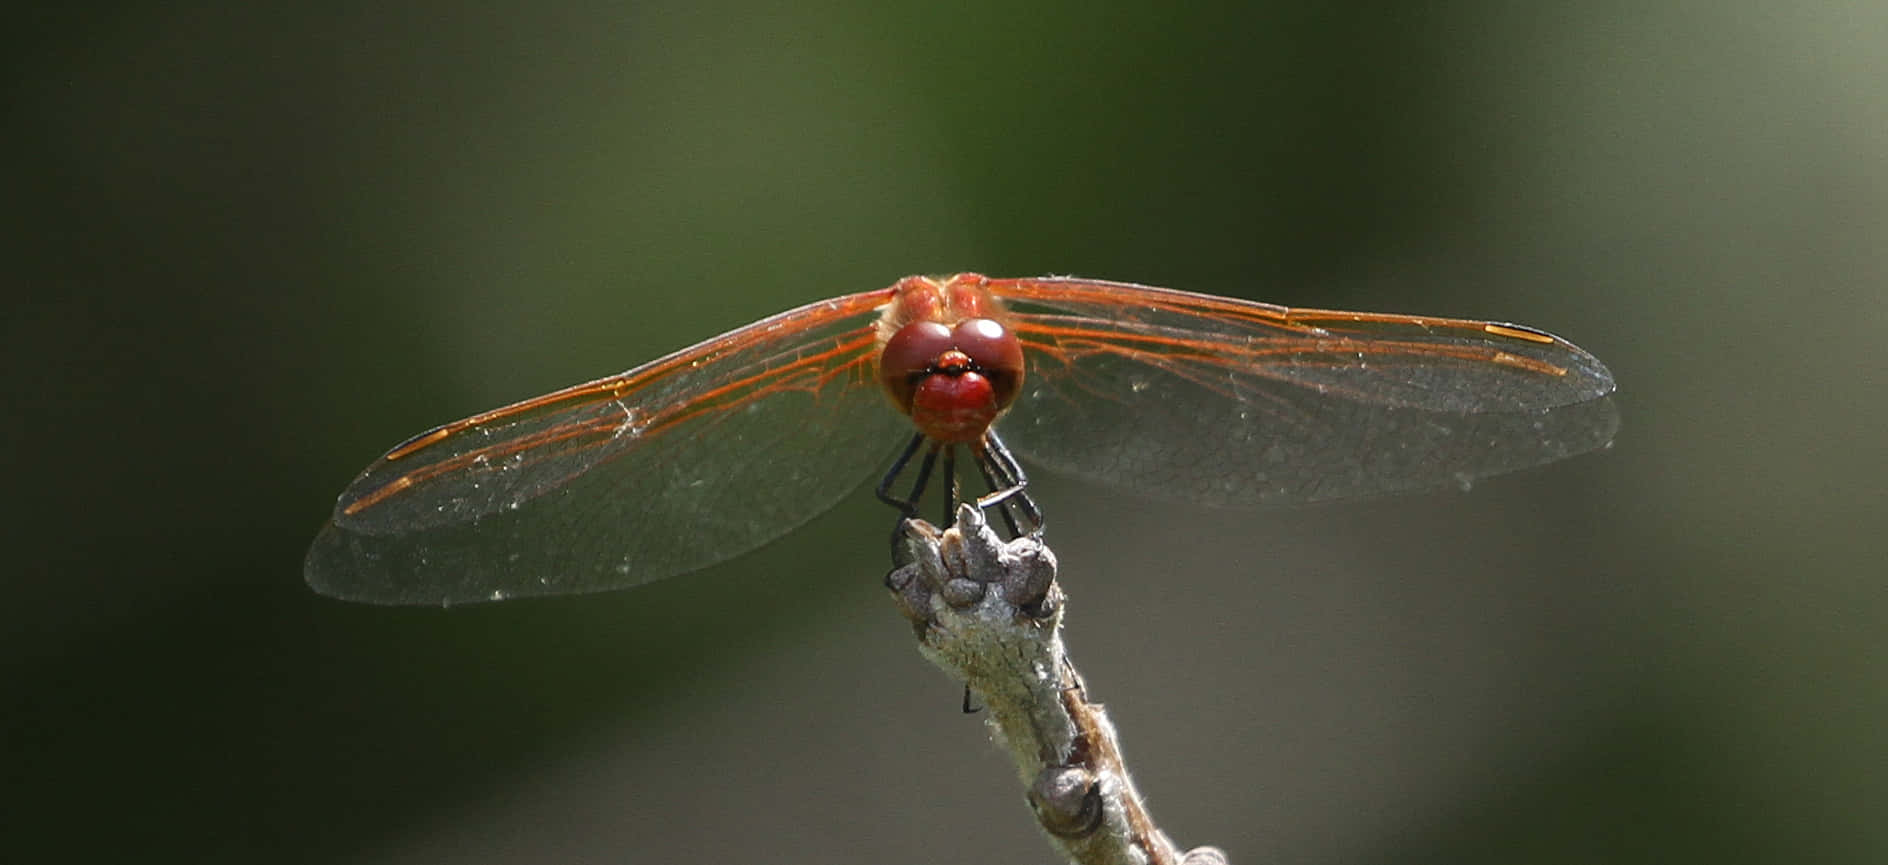 Vibrant Red Dragonfly Close-up Wallpaper